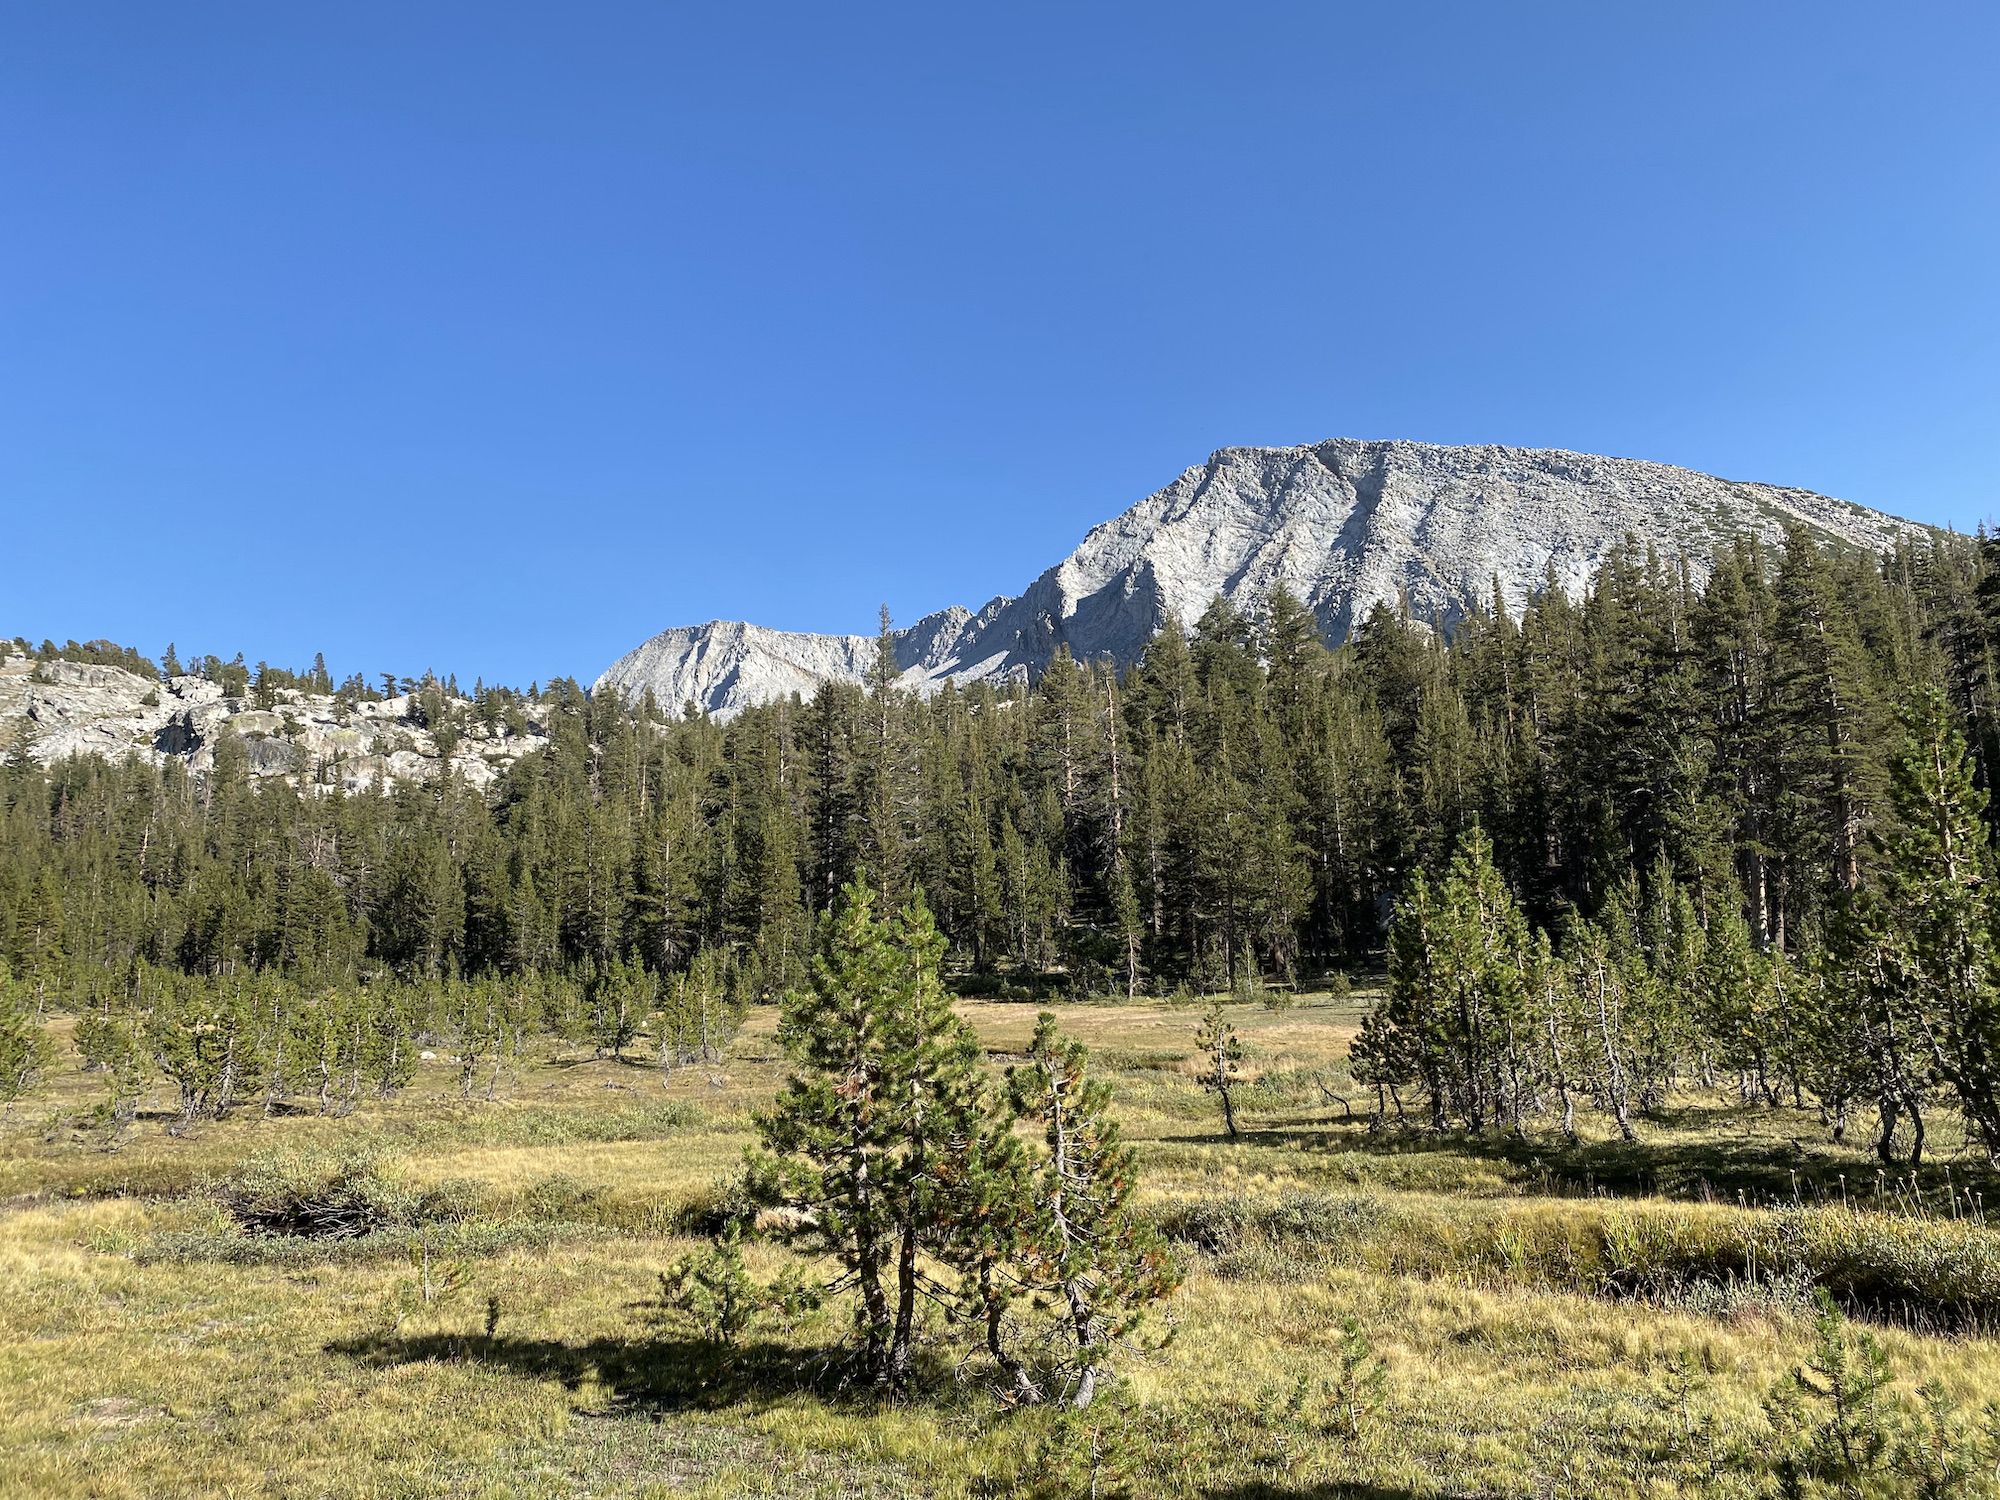 A meadow with small pine trees and large mountains behind.